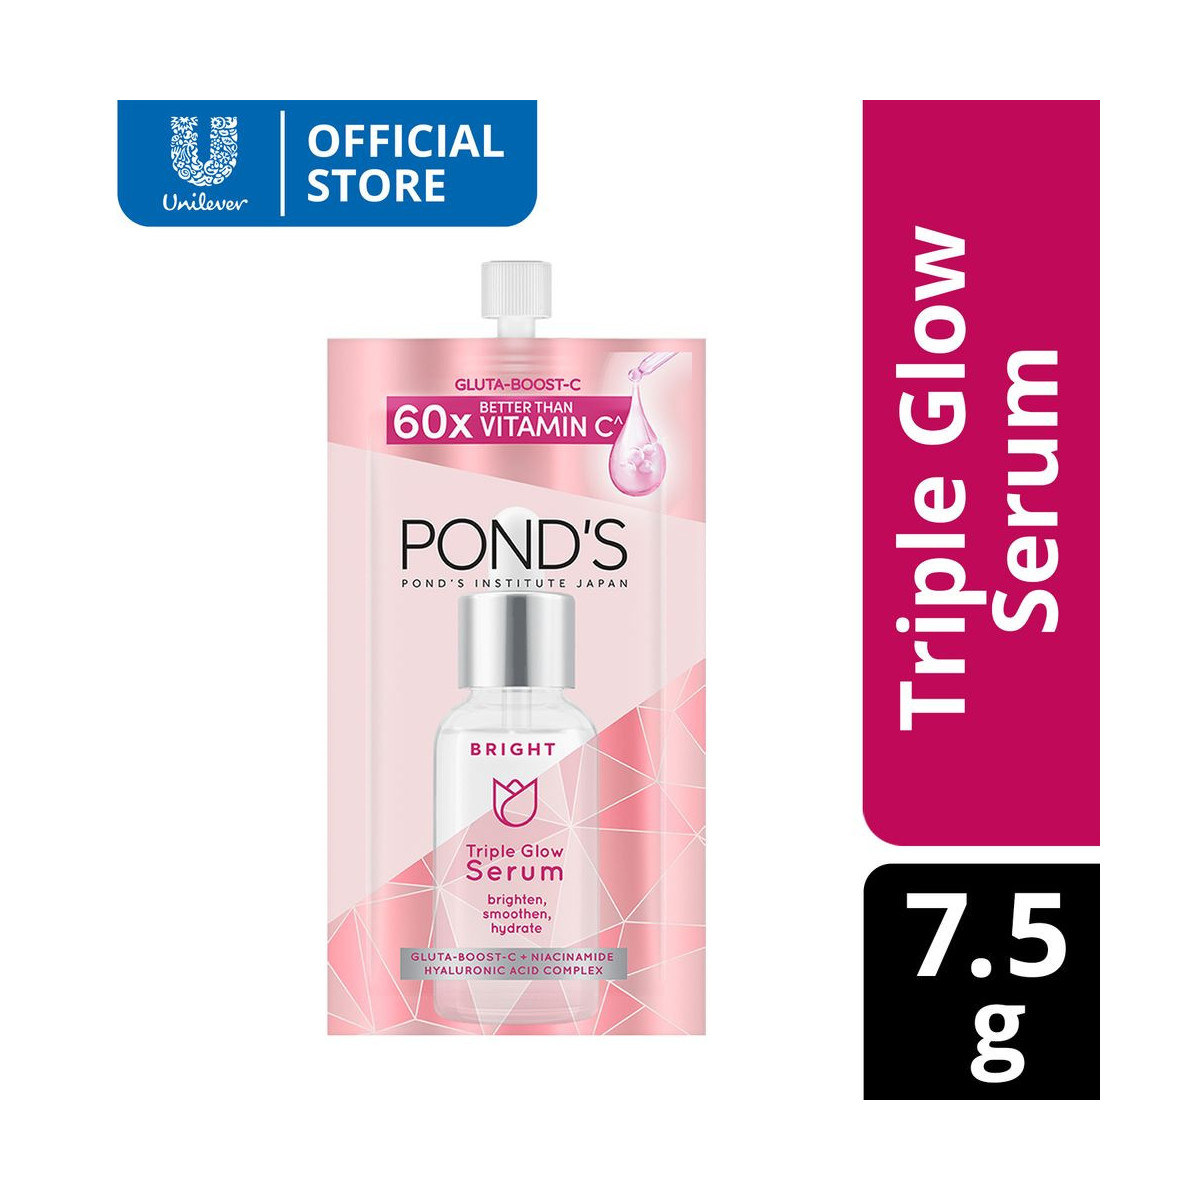 POND'S Bright Triple Glow Facial Serum with Gluta Boost and Niacinamide for Dewy Hydrated Skin 7.5g